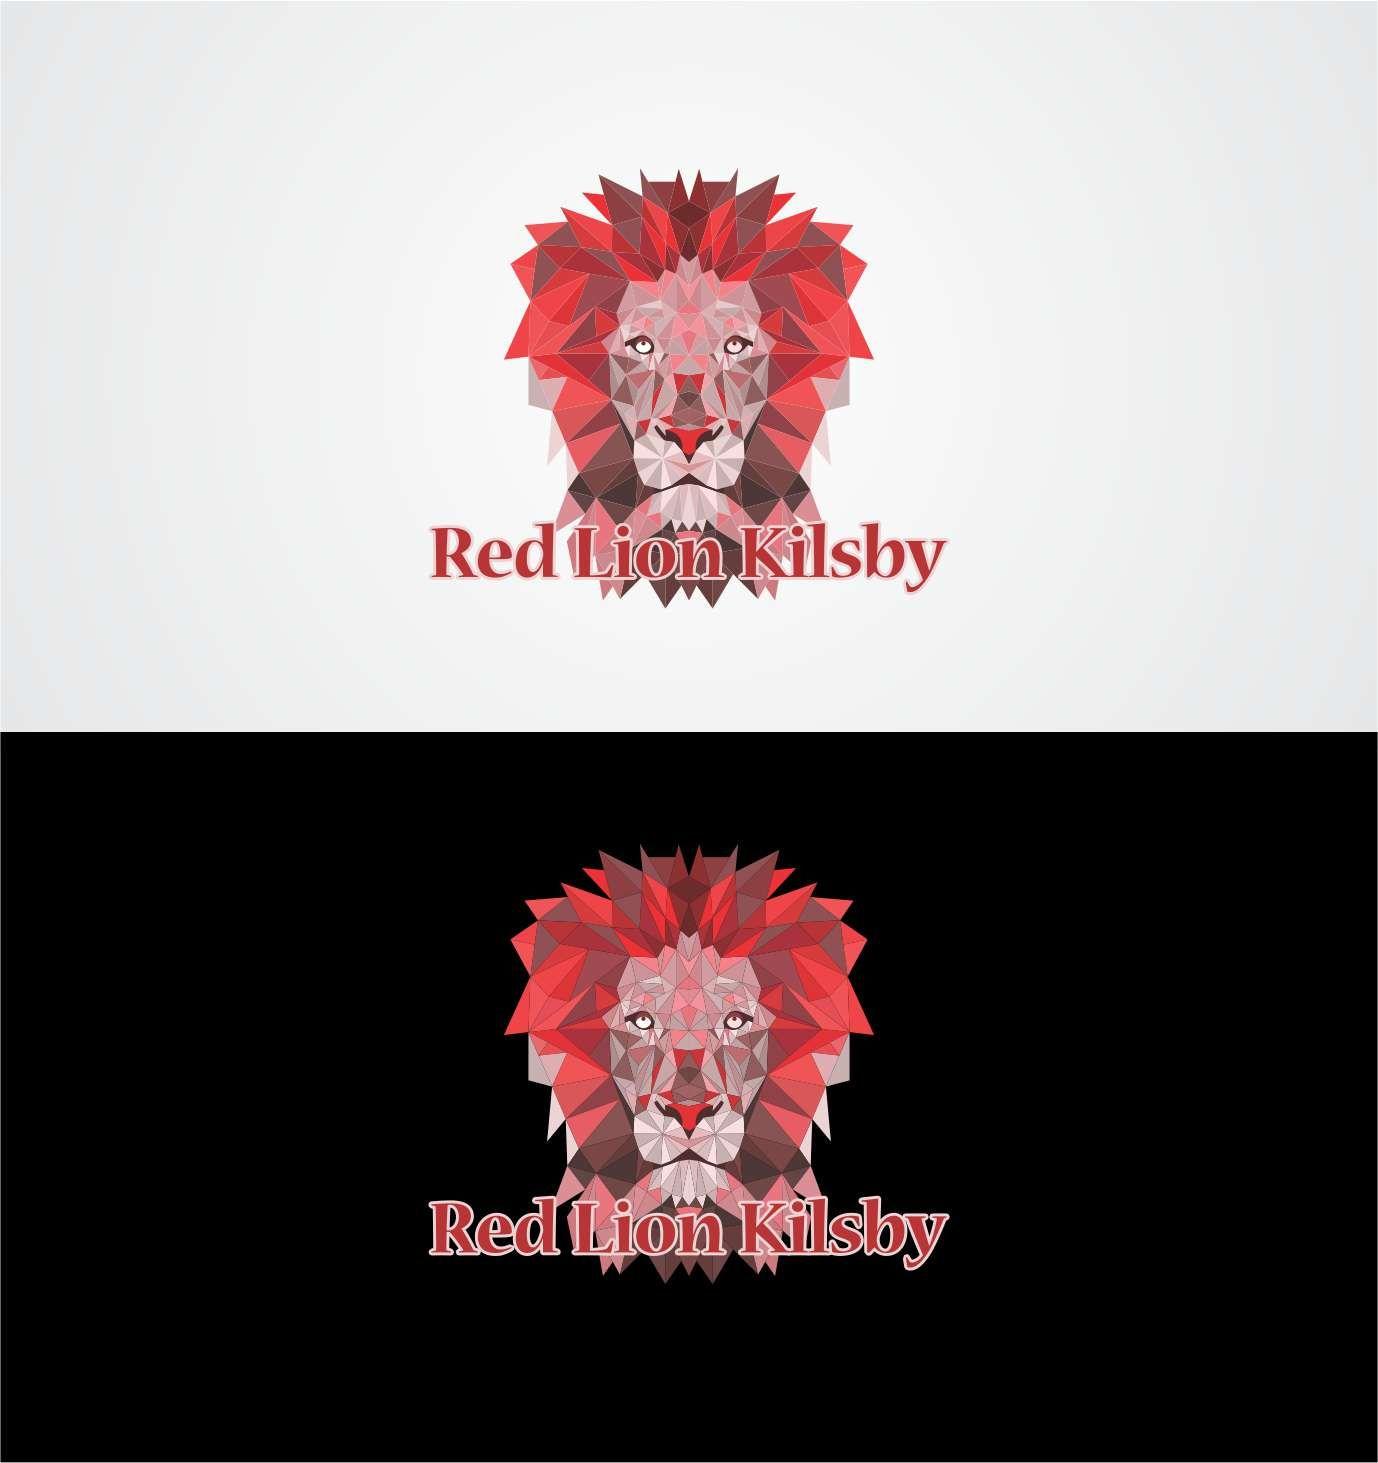 Red Lion Company Logo - Business Logo Design for Red Lion Kilsby by LauraPol | Design #12370594